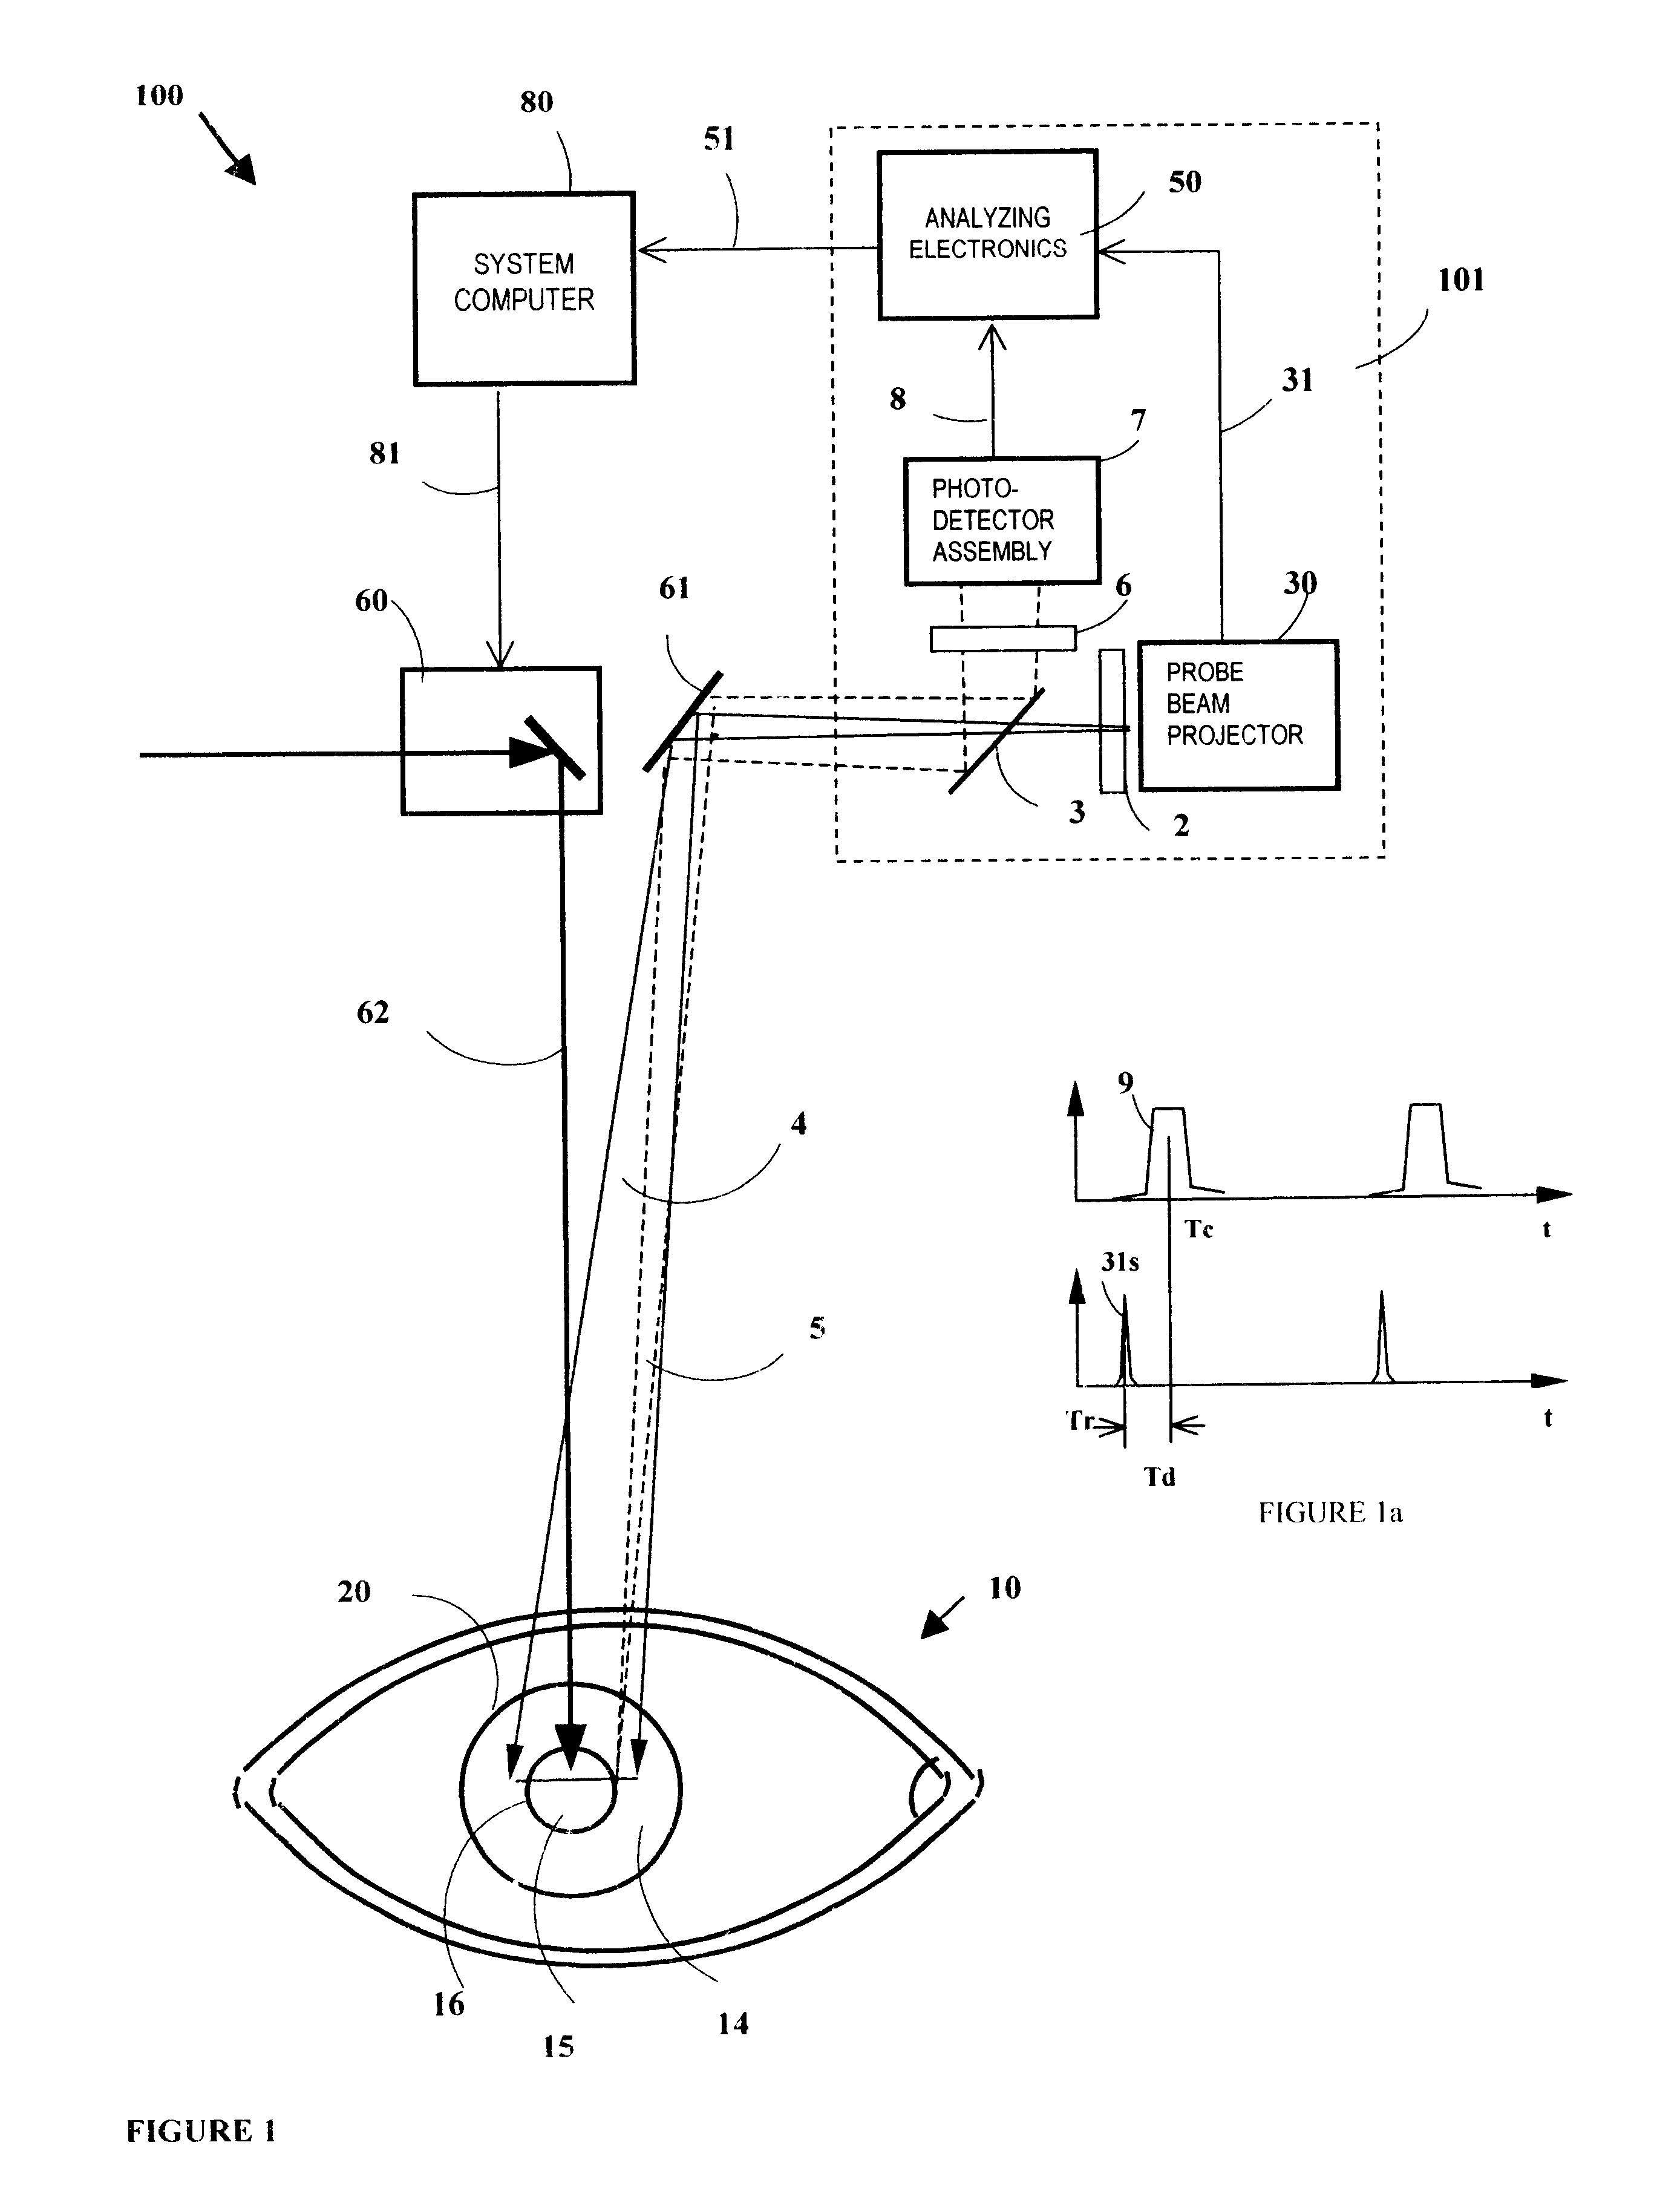 Optical tracking device employing scanning beams on symmetric reference